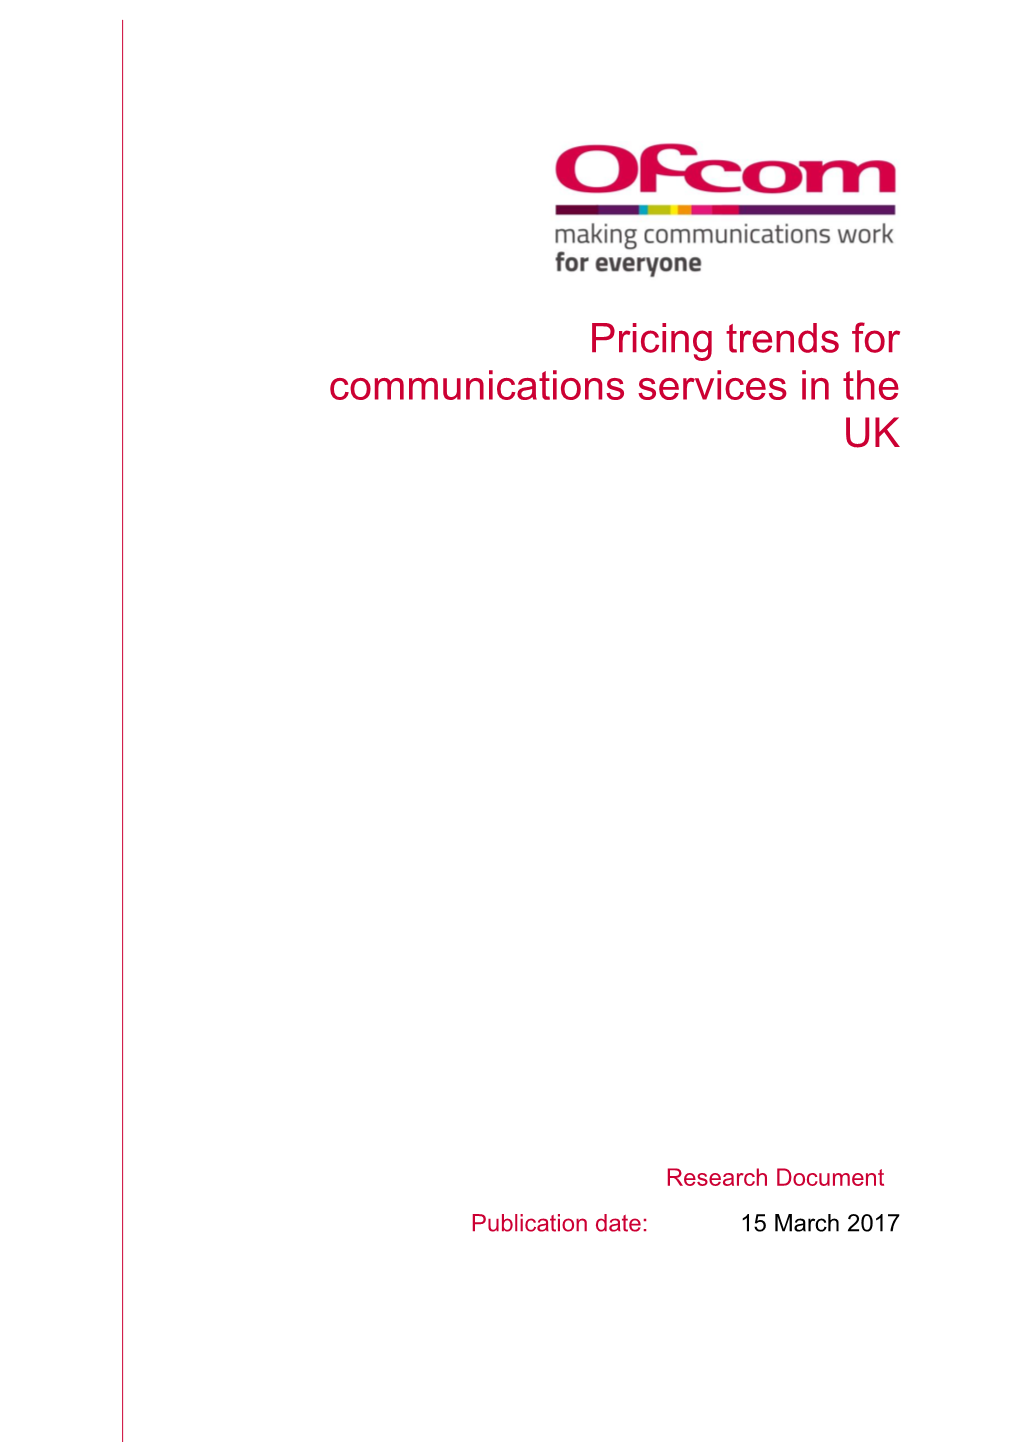 Pricing Trends for Communications Services in the UK